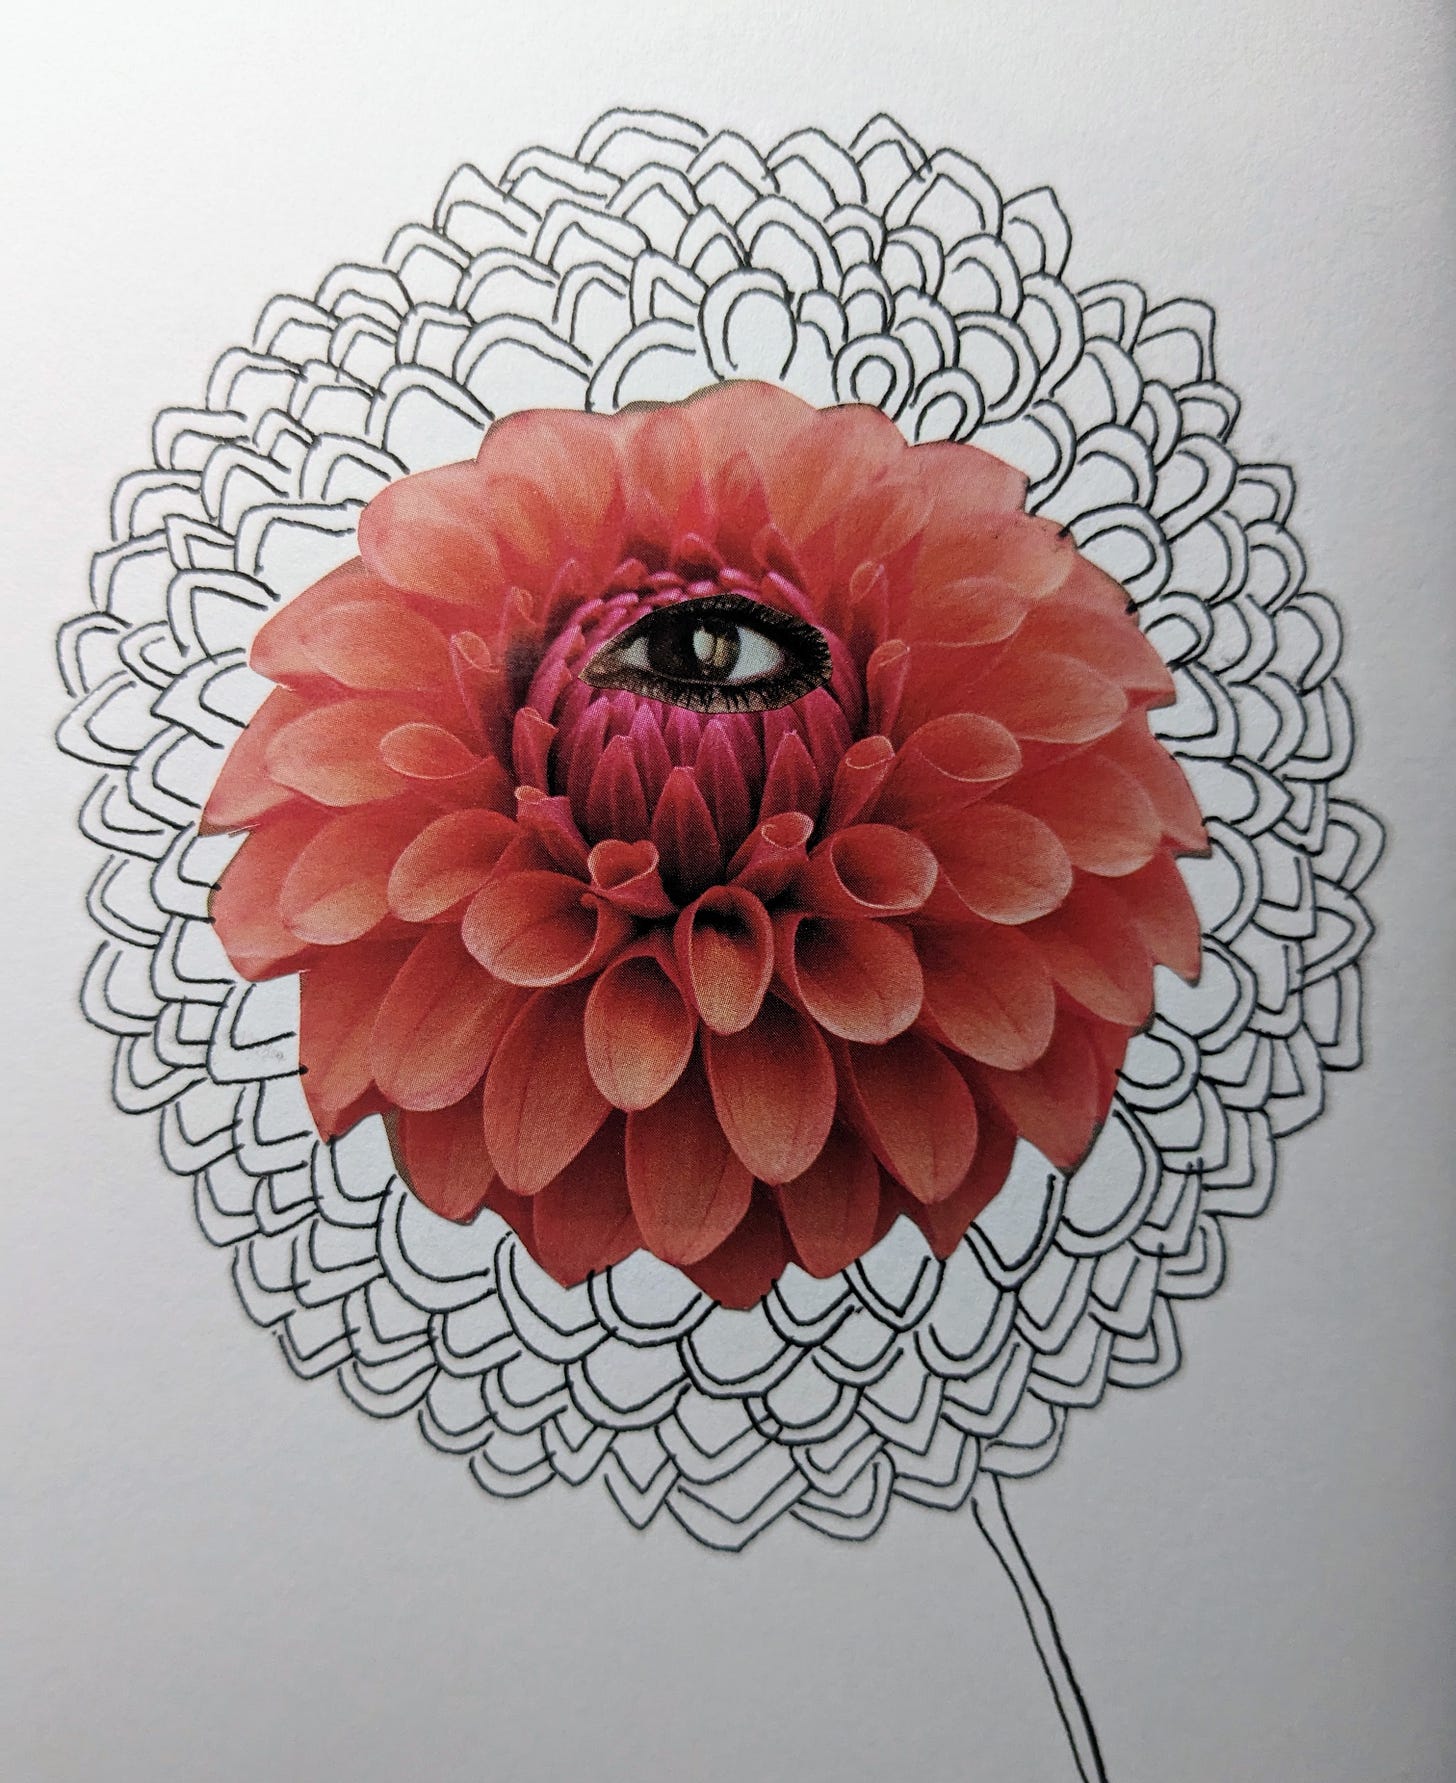 Collage, pen and ink image by Sophie of a flower with an eye at the centre